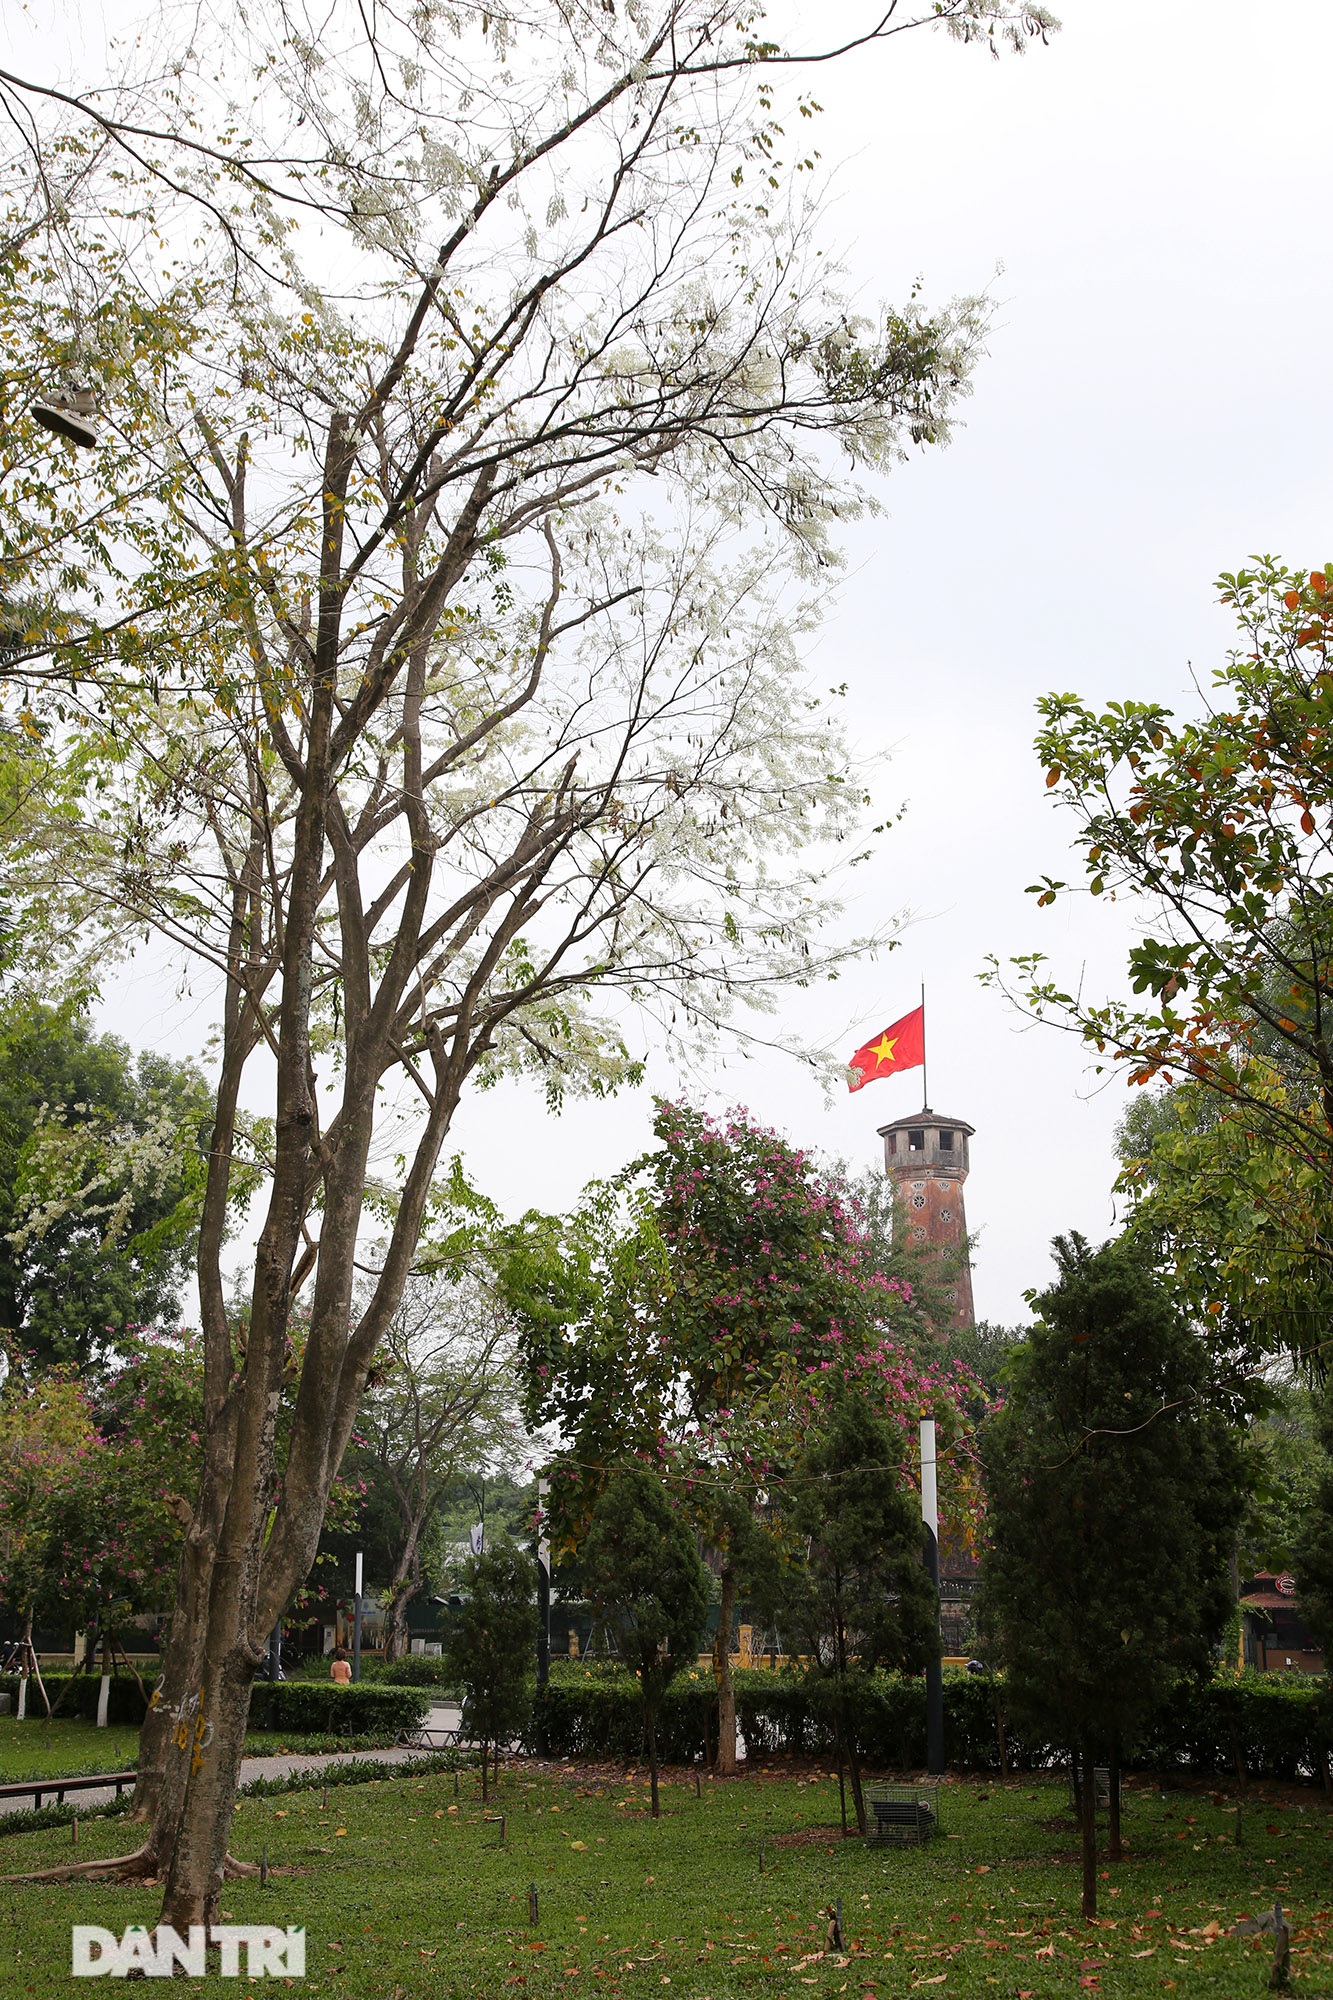 Hanoi is very beautiful in the season of pure white blooming flowers - 13